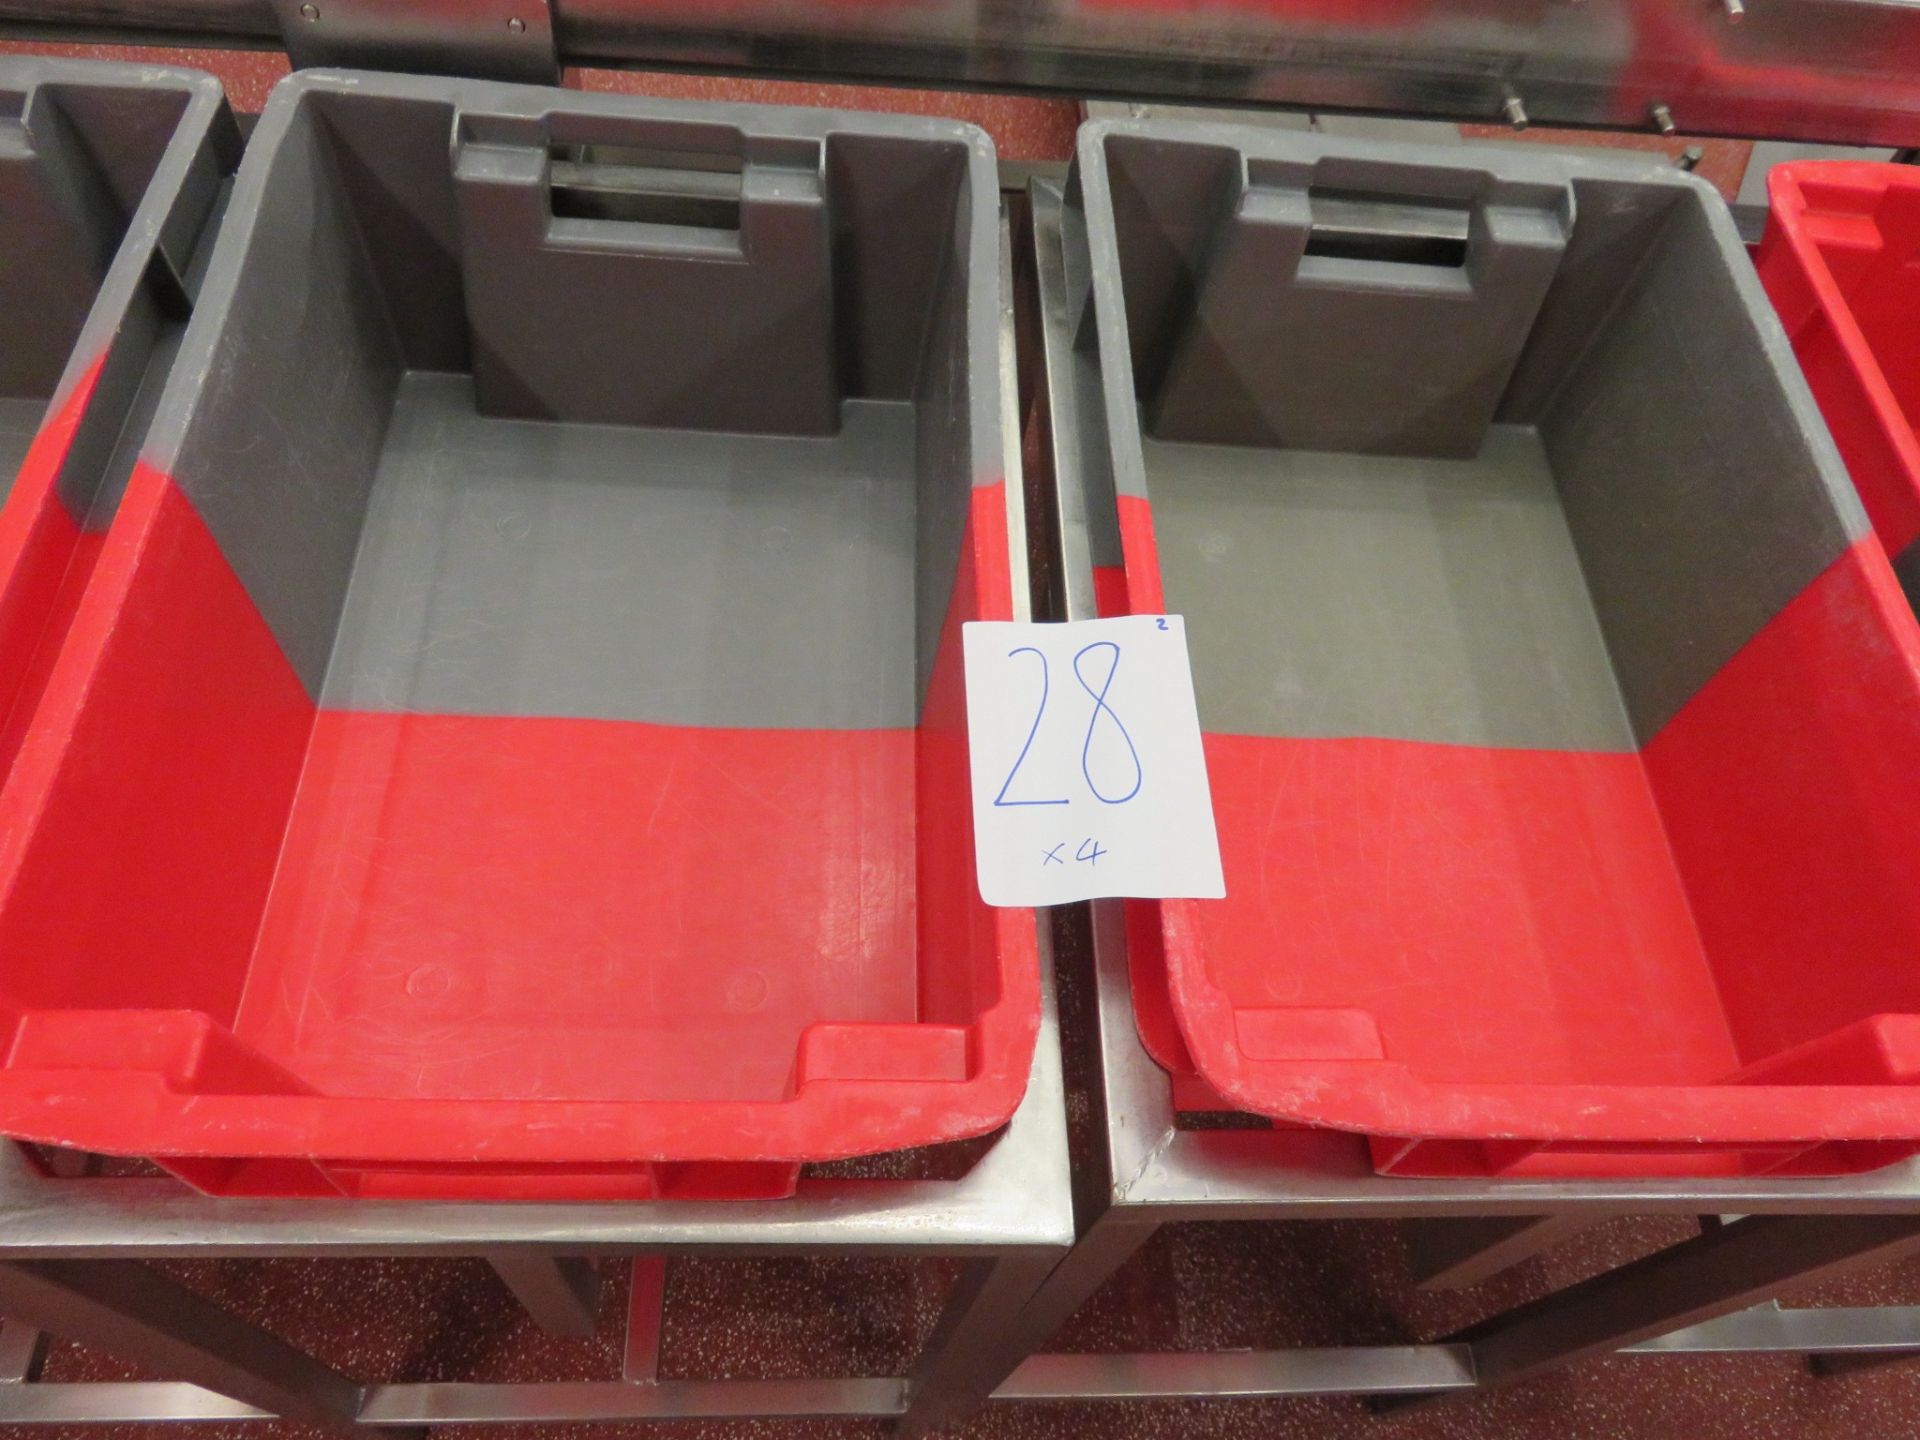 4 x S/s floor standing product tray holders 630 x 430mm with trays. Lift Out £7 - Image 2 of 2